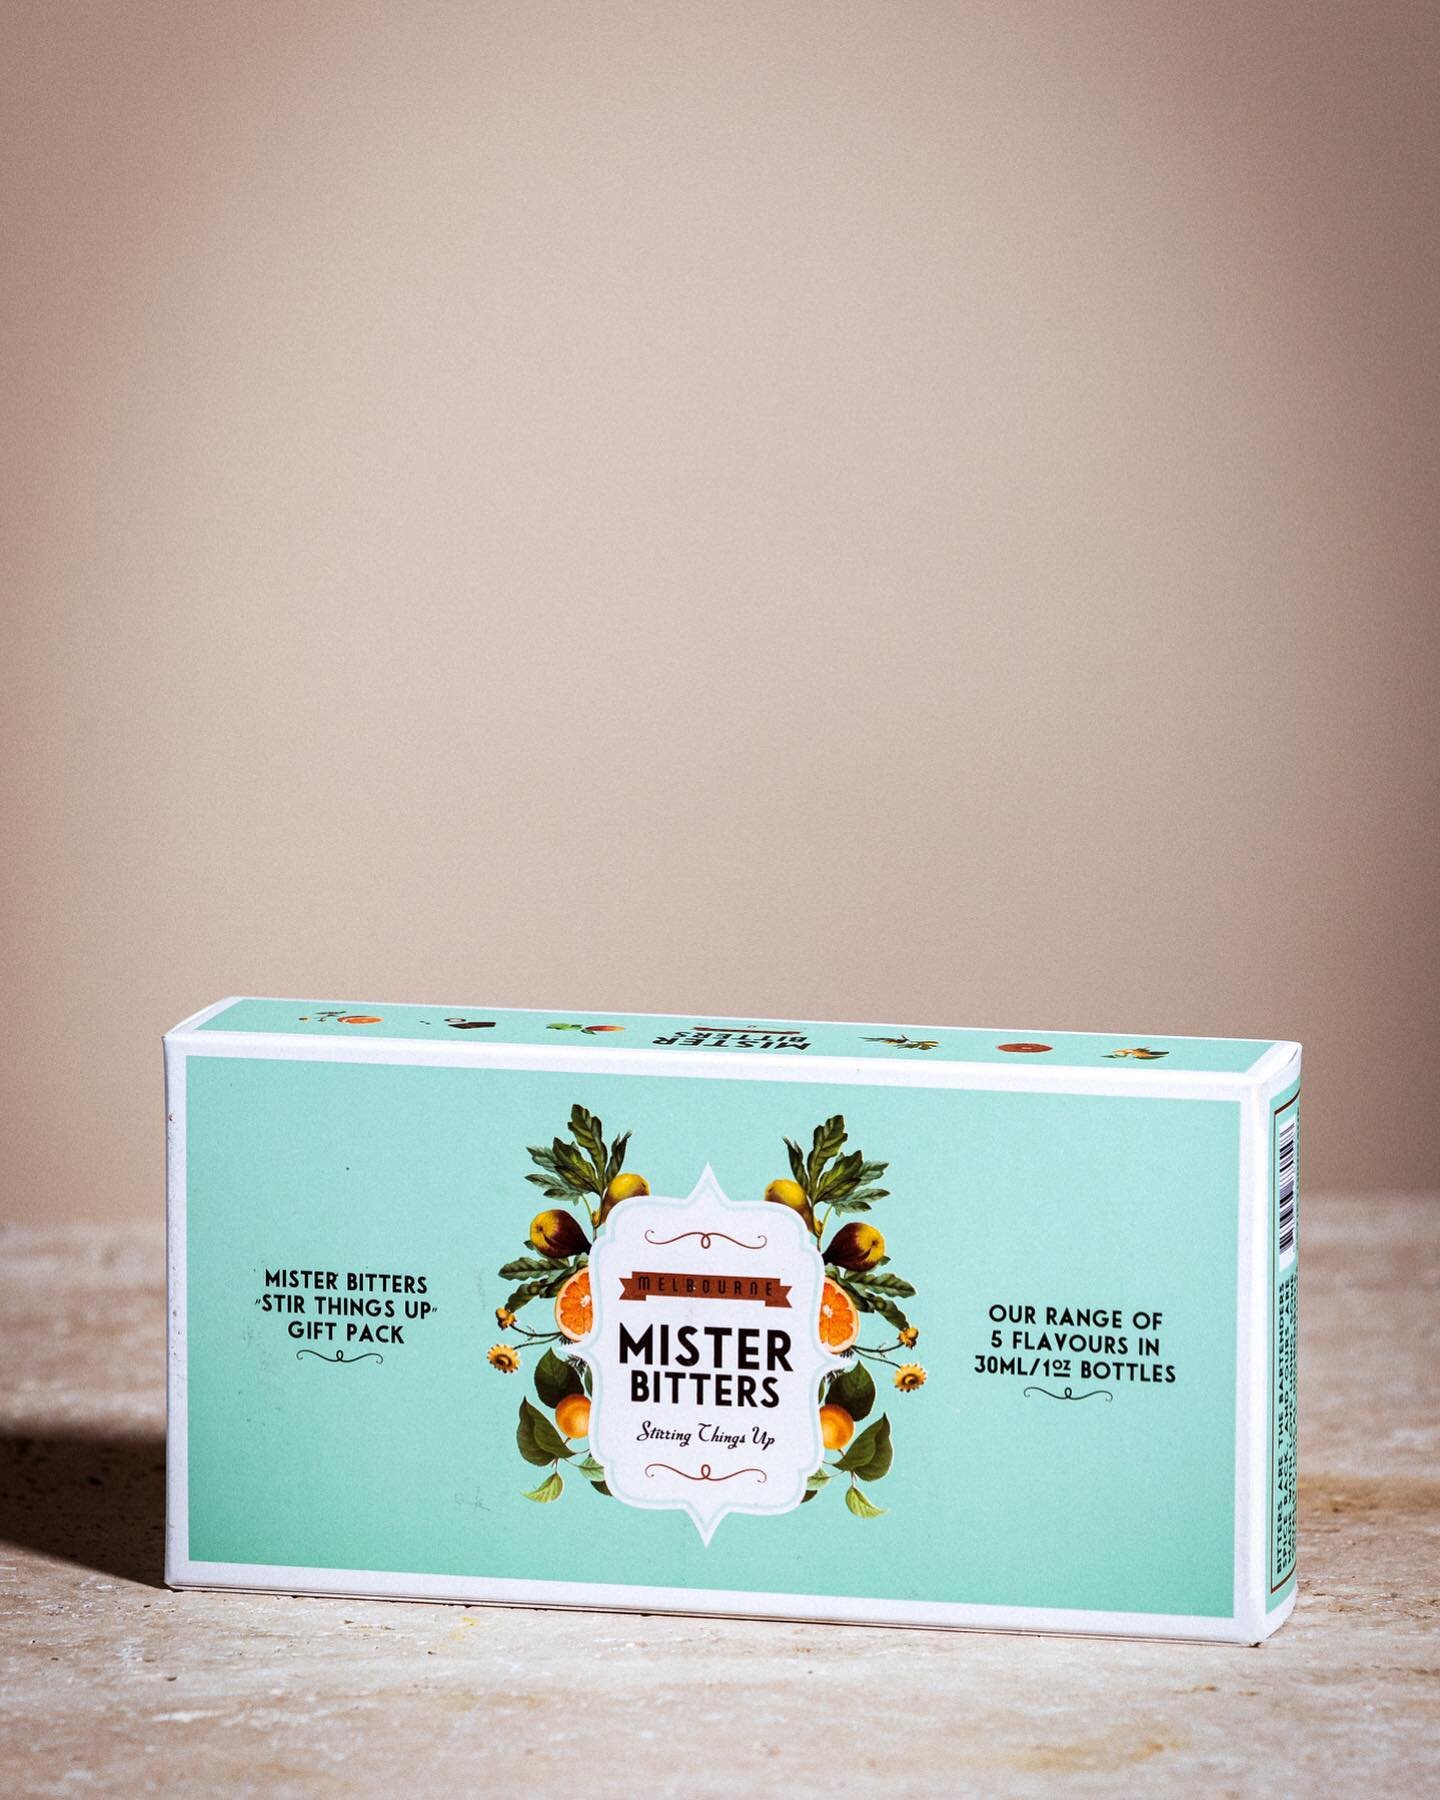 A small gesture that goes a long way. 

Mister Bitters&rsquo; gift packs with the full range of our flavour-forward bitters.

Find Mister Bitters online via @only_bitters 
🍊